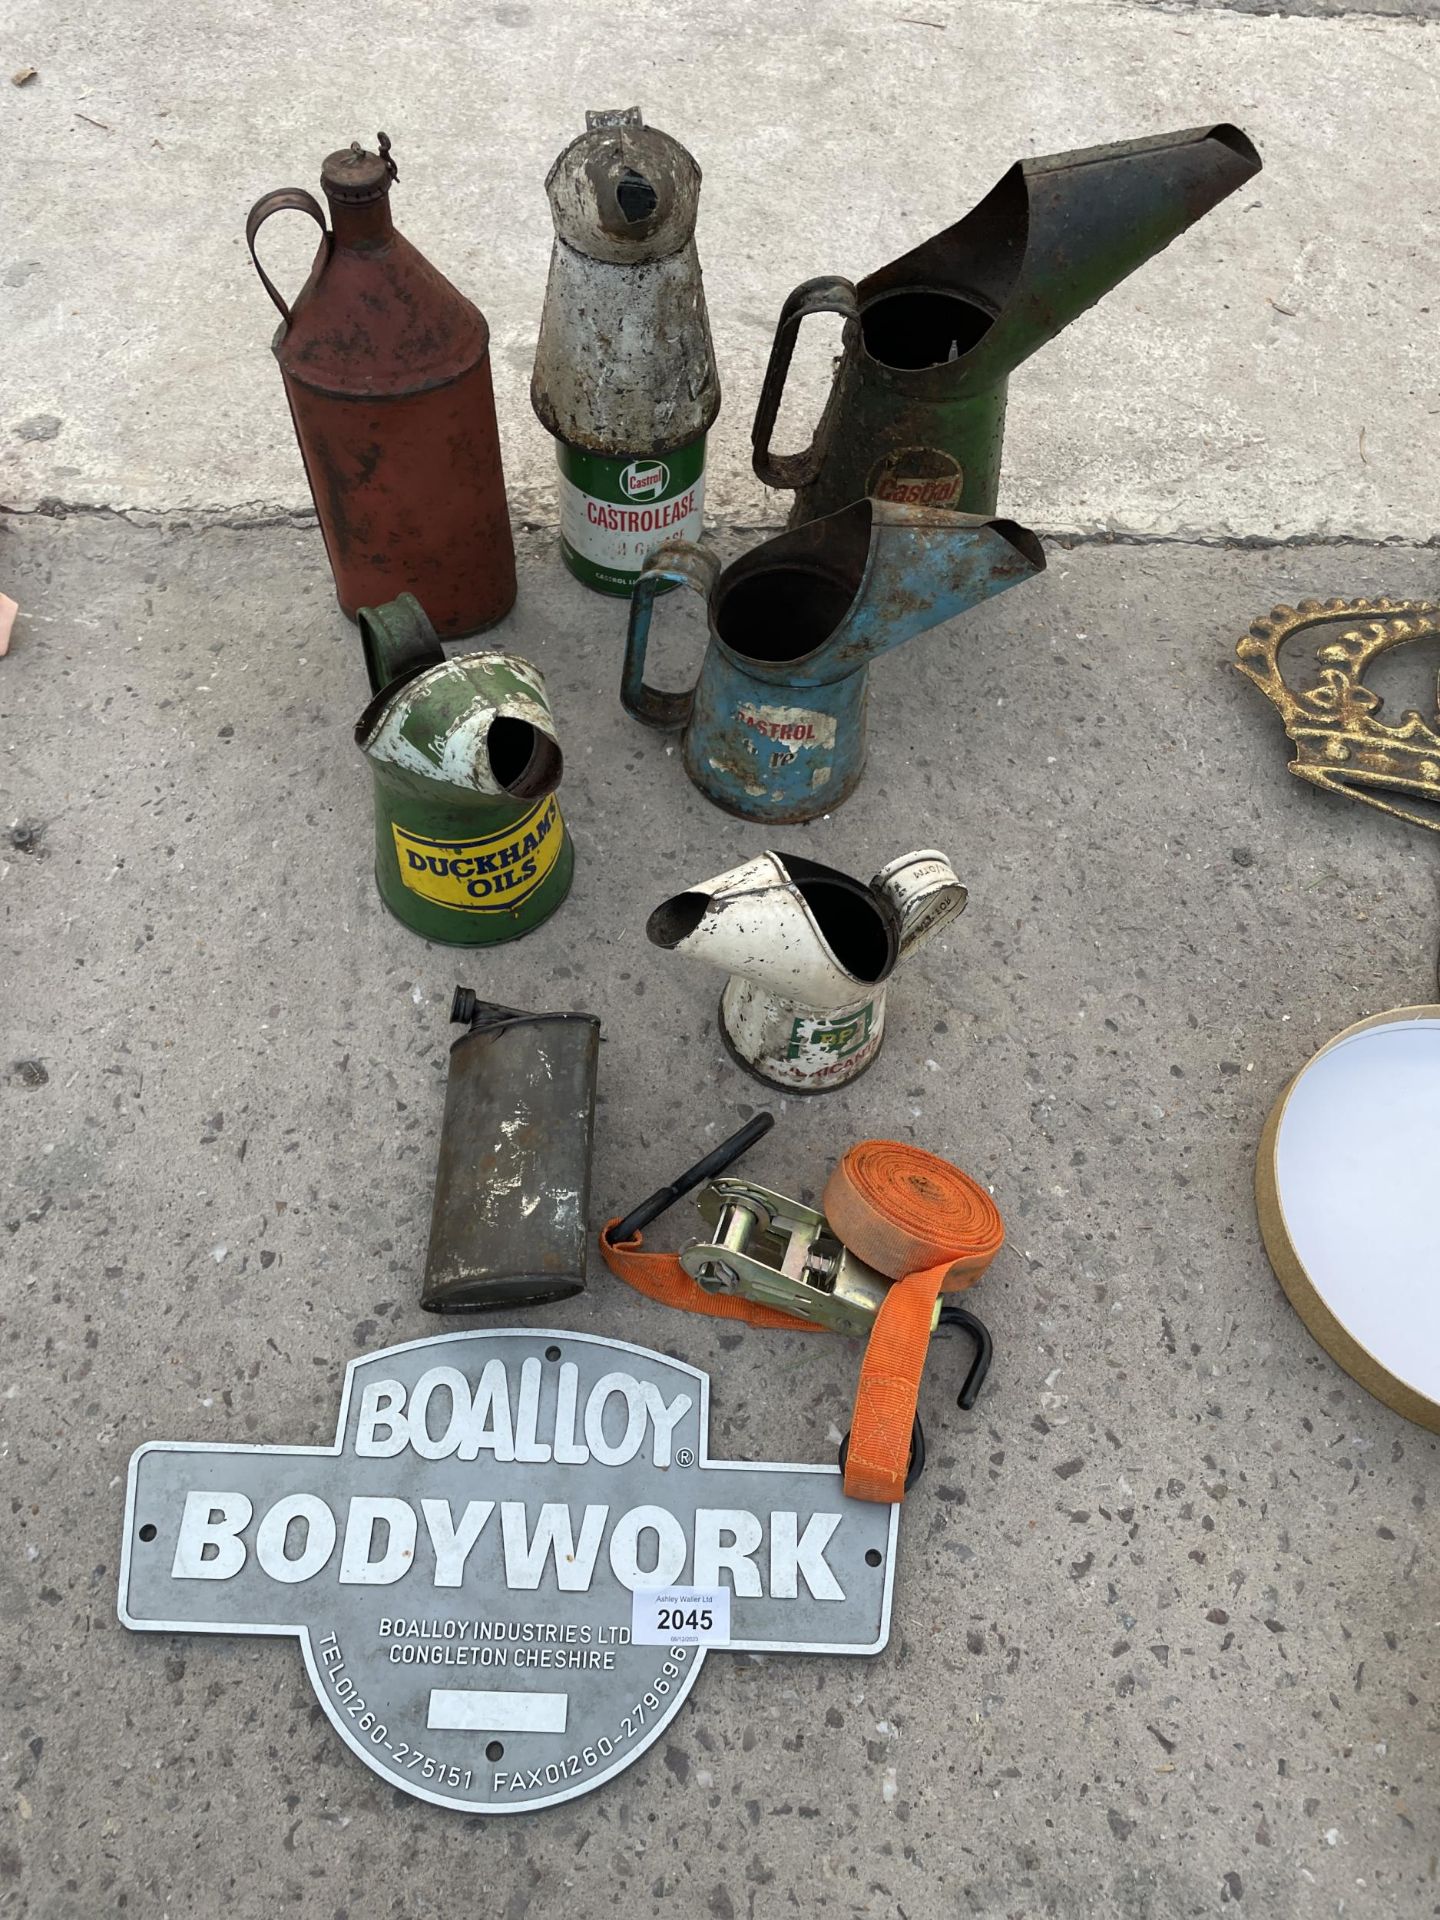 AN ASSORTMENT OF VINTAGE OIL CANS AND A METAL SIGN ETC